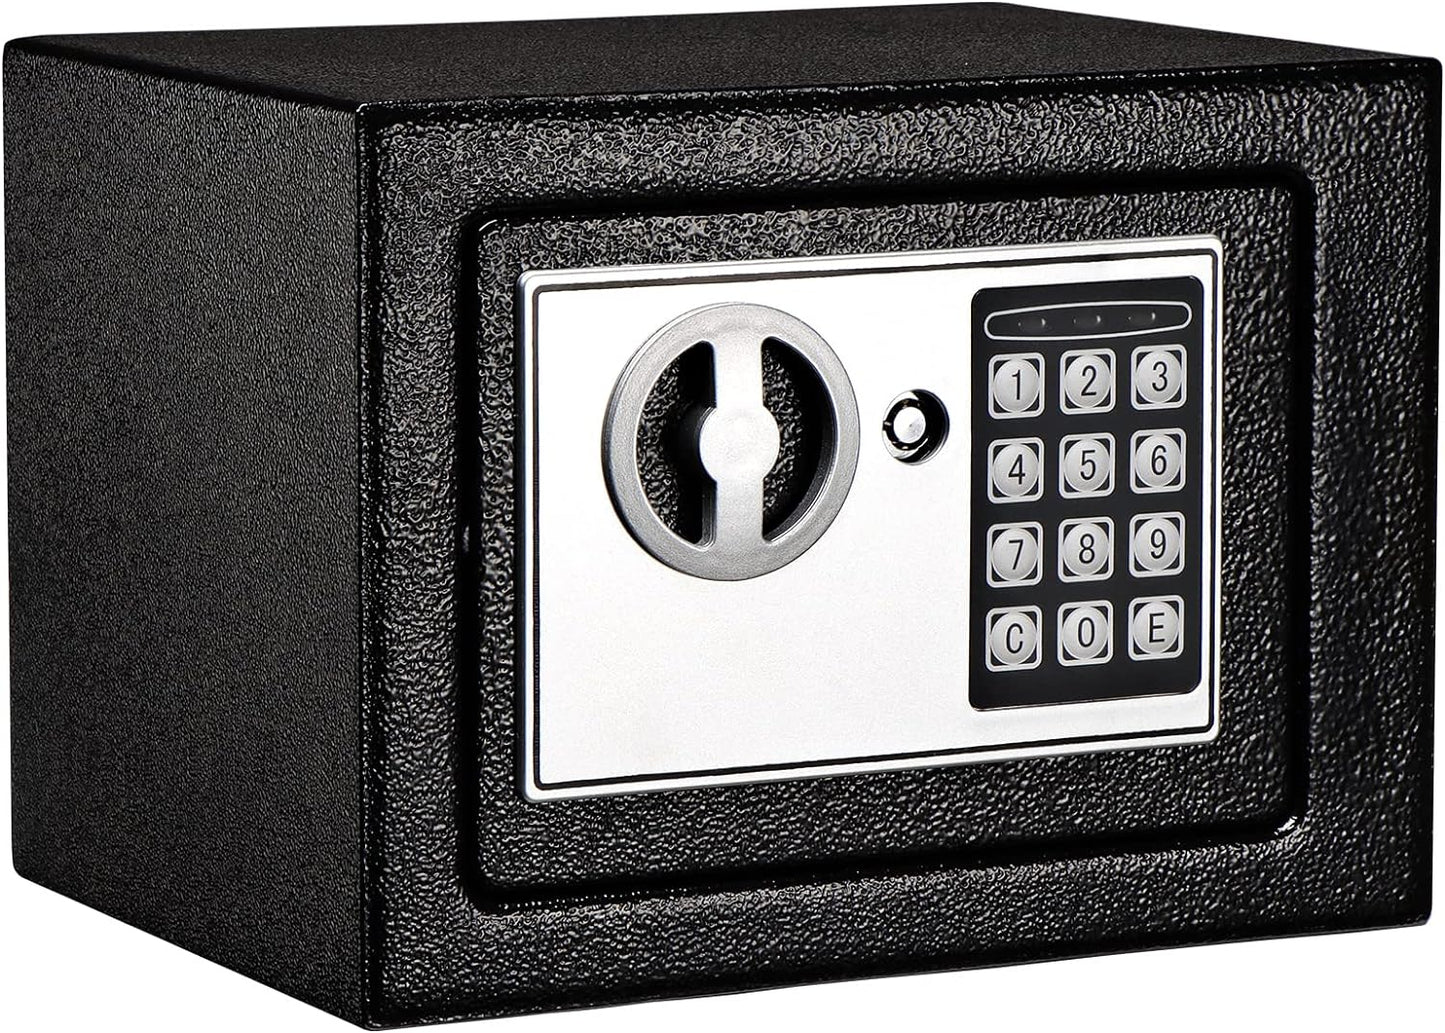 GnL Recsports Electronic Safe Box with Keypad & Keys, Money Lock Boxes, Safety Boxes for Home, Office, Hotel Rooms,Business, Jewelry, Gun, Cash, Steel Alloy Drop Safe 9.1" x 6.7" x 6.7''